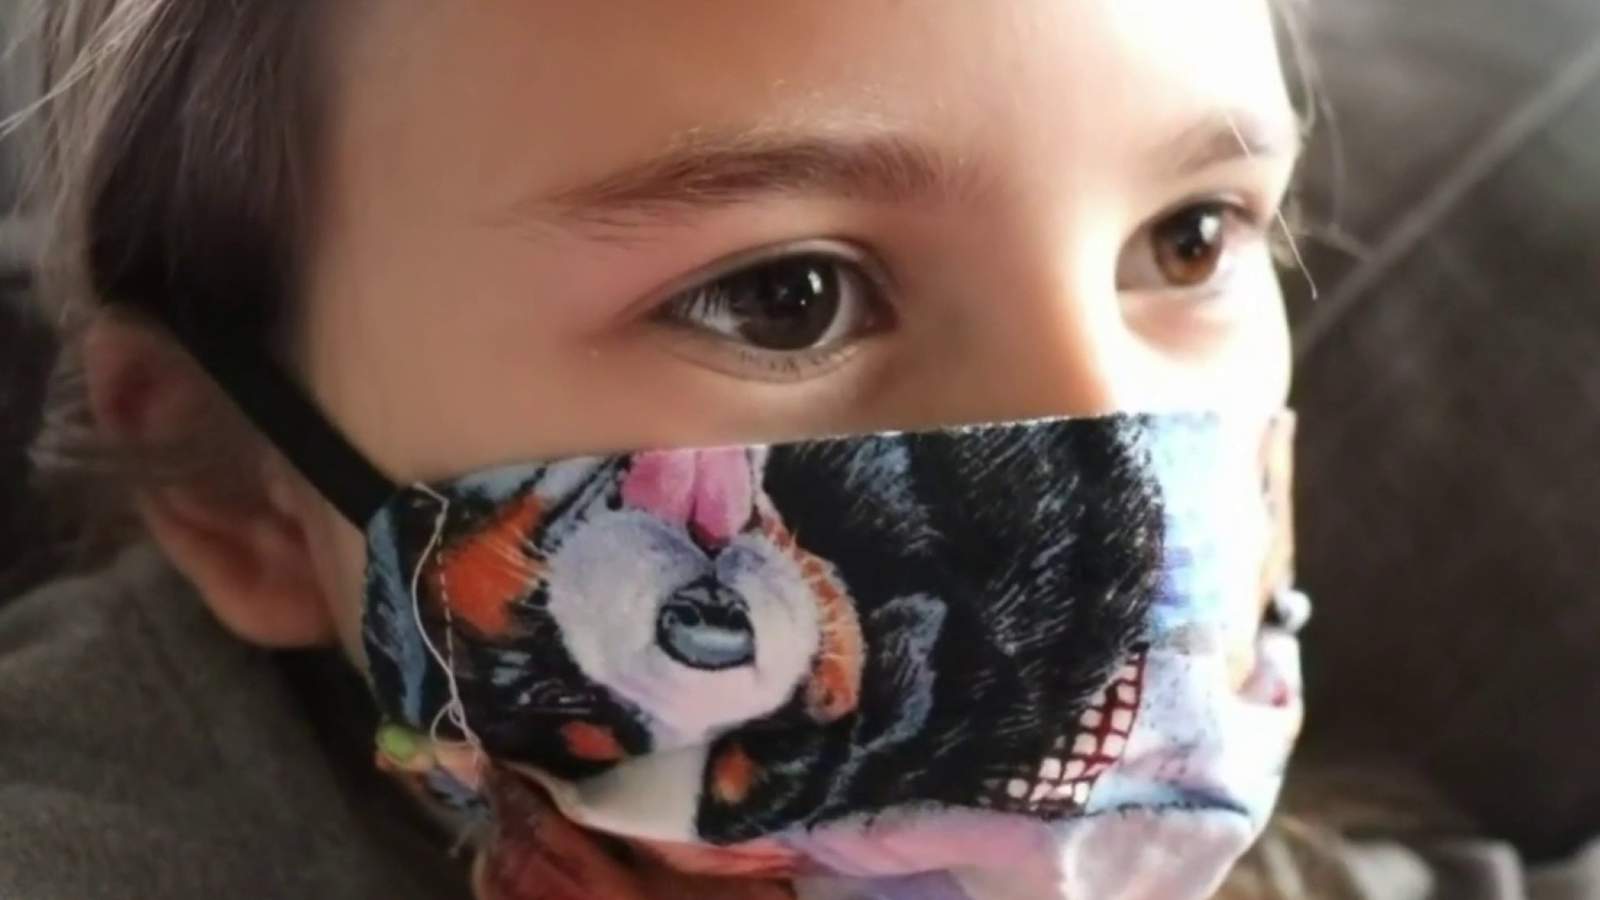 How to help you children feel more comfortable wearing a mask